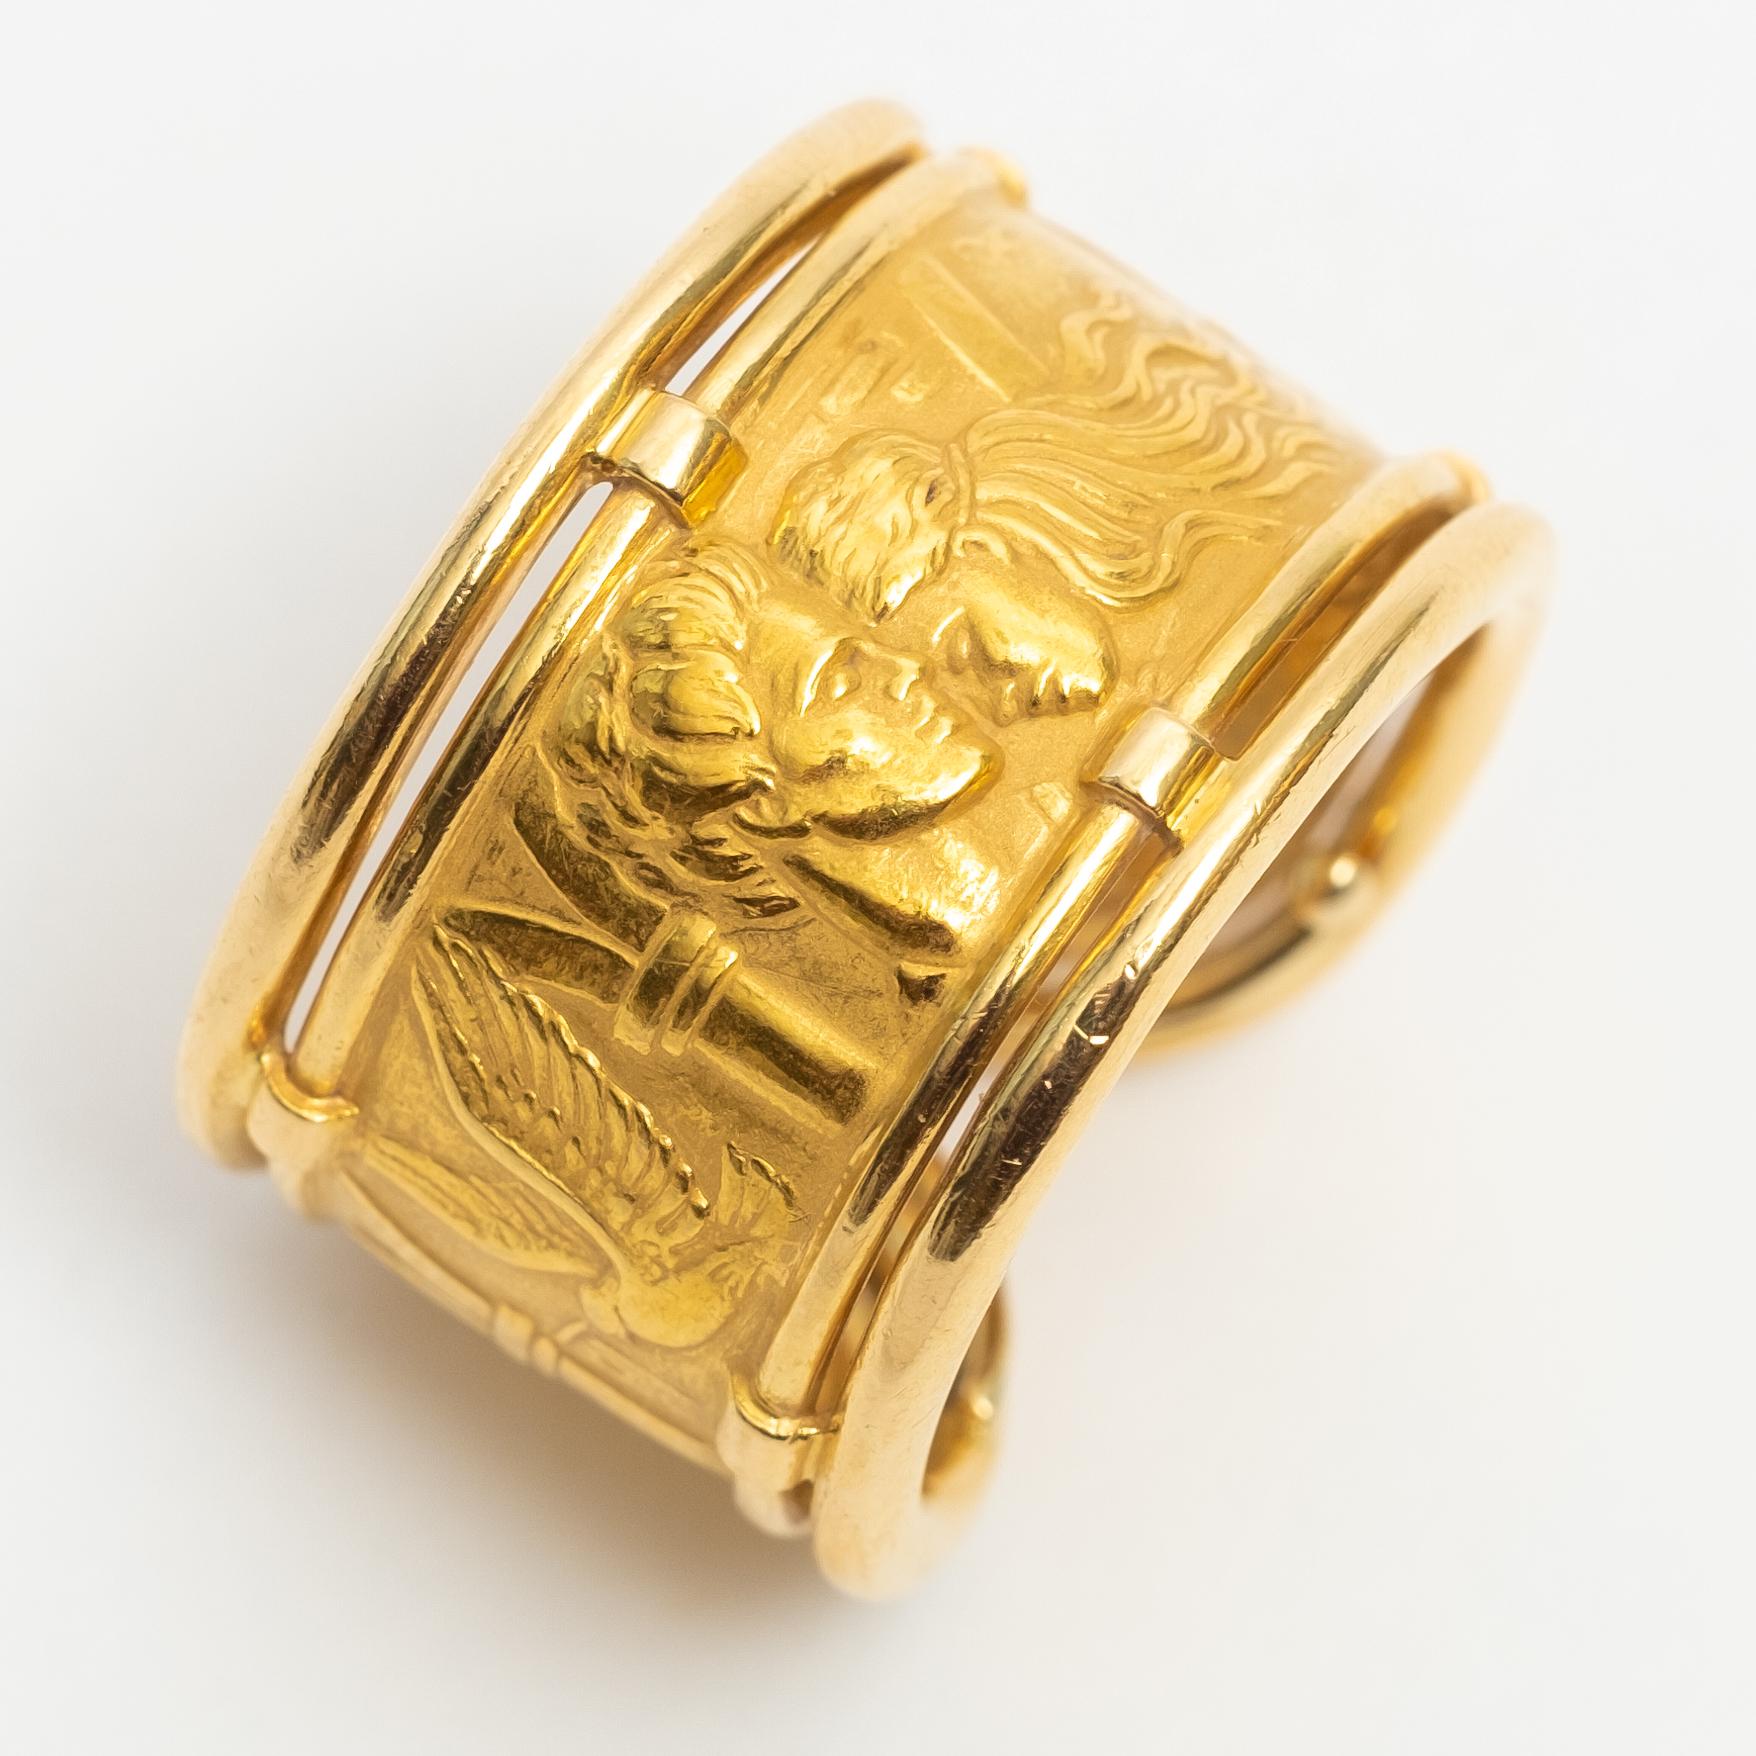 18K Carrera y Carrera Signed Romeo and Juliet Gold Ring. Ring Size 5. Weight 7 grams, Very Good condition. Marked 750, CC